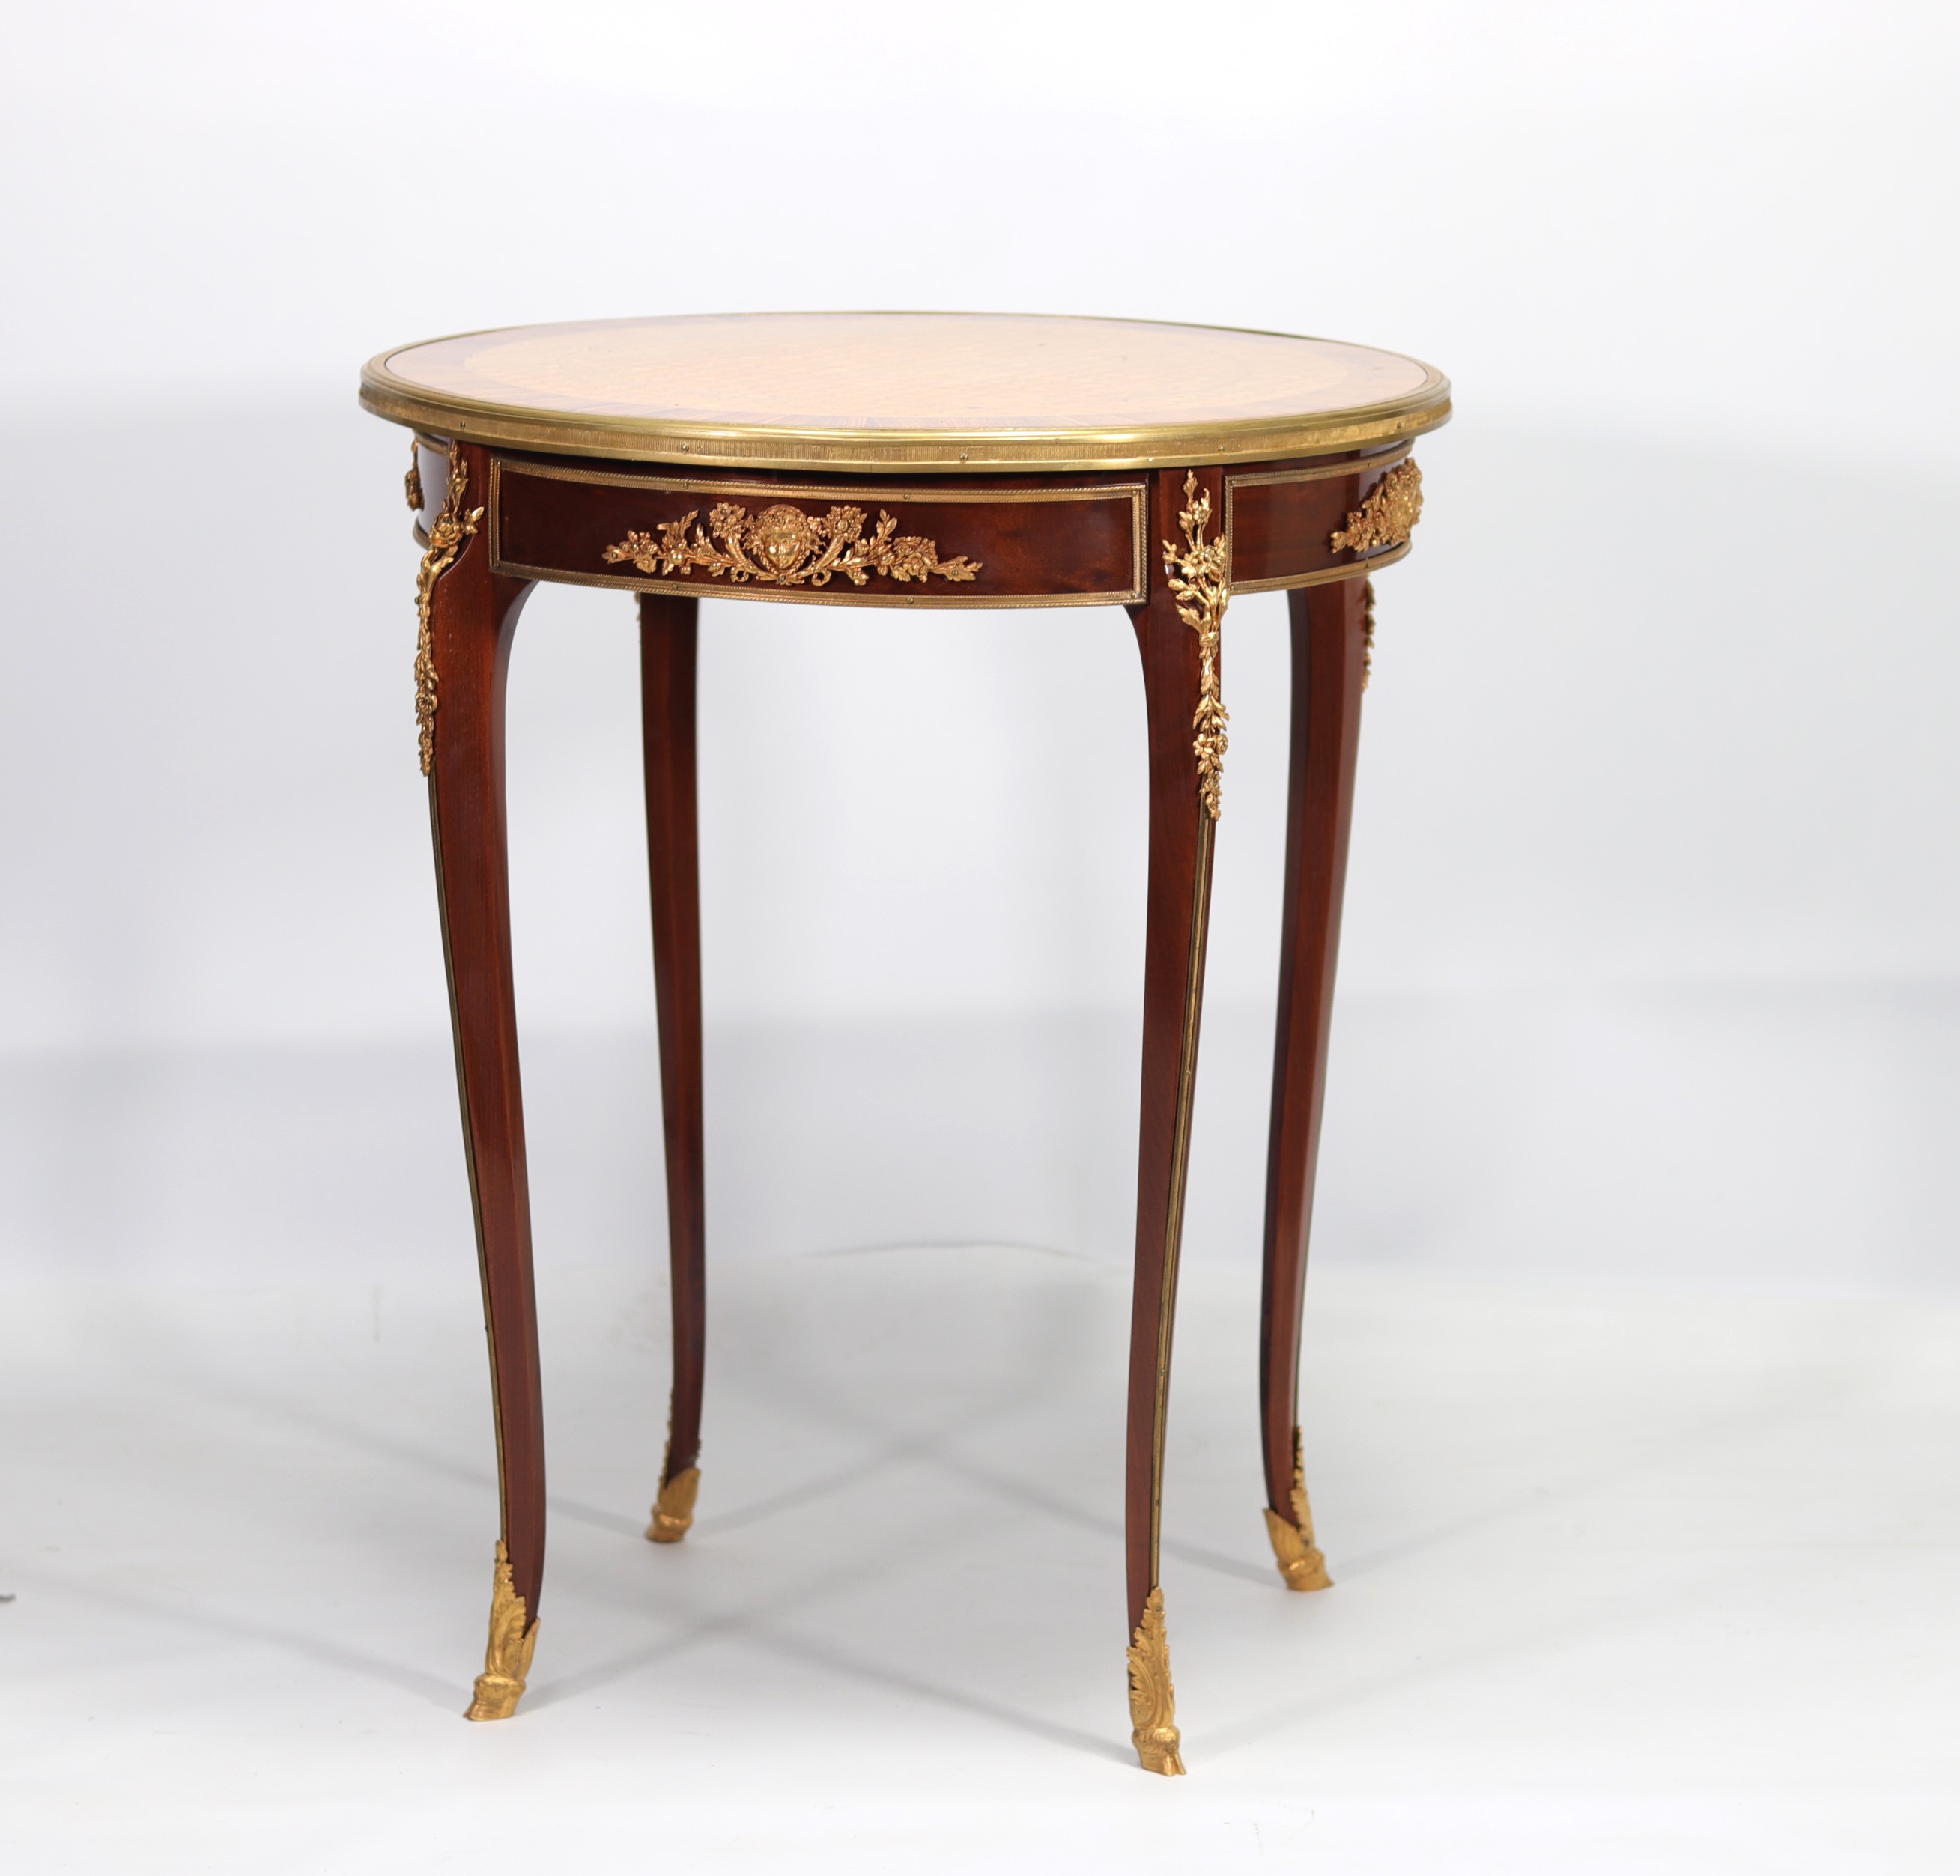 Small marquetry and ormolu pedestal table in the style of Adam WEISWEILER (1744-1820) - Image 2 of 4